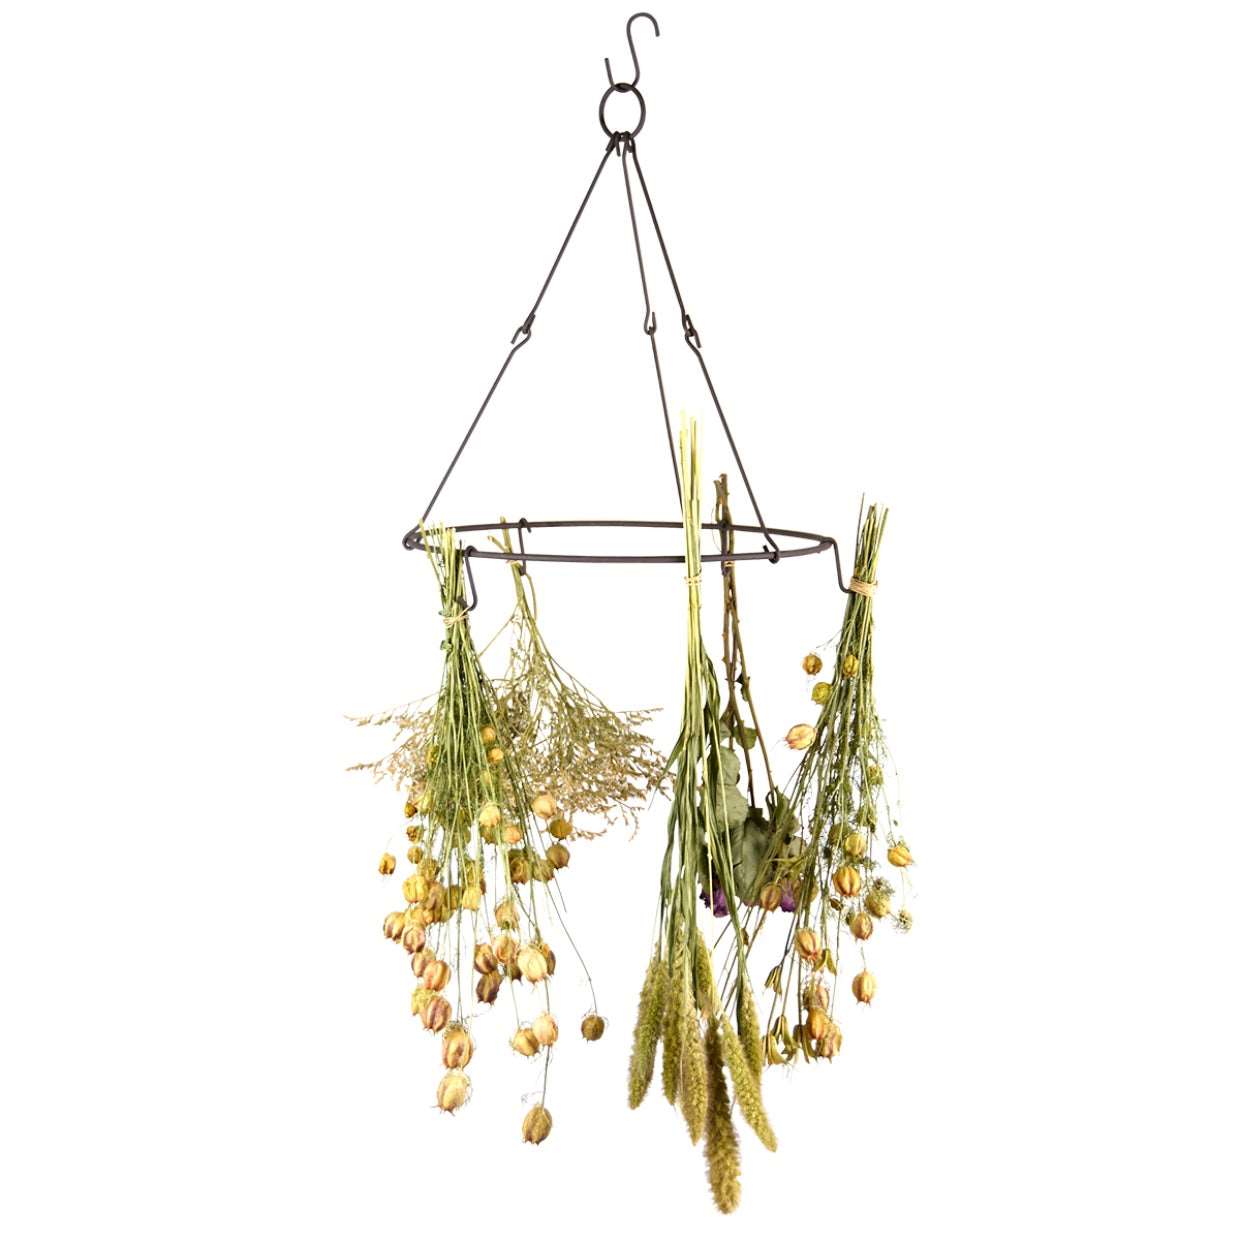 Drying Rack for Flowers and Herbs - Seedor